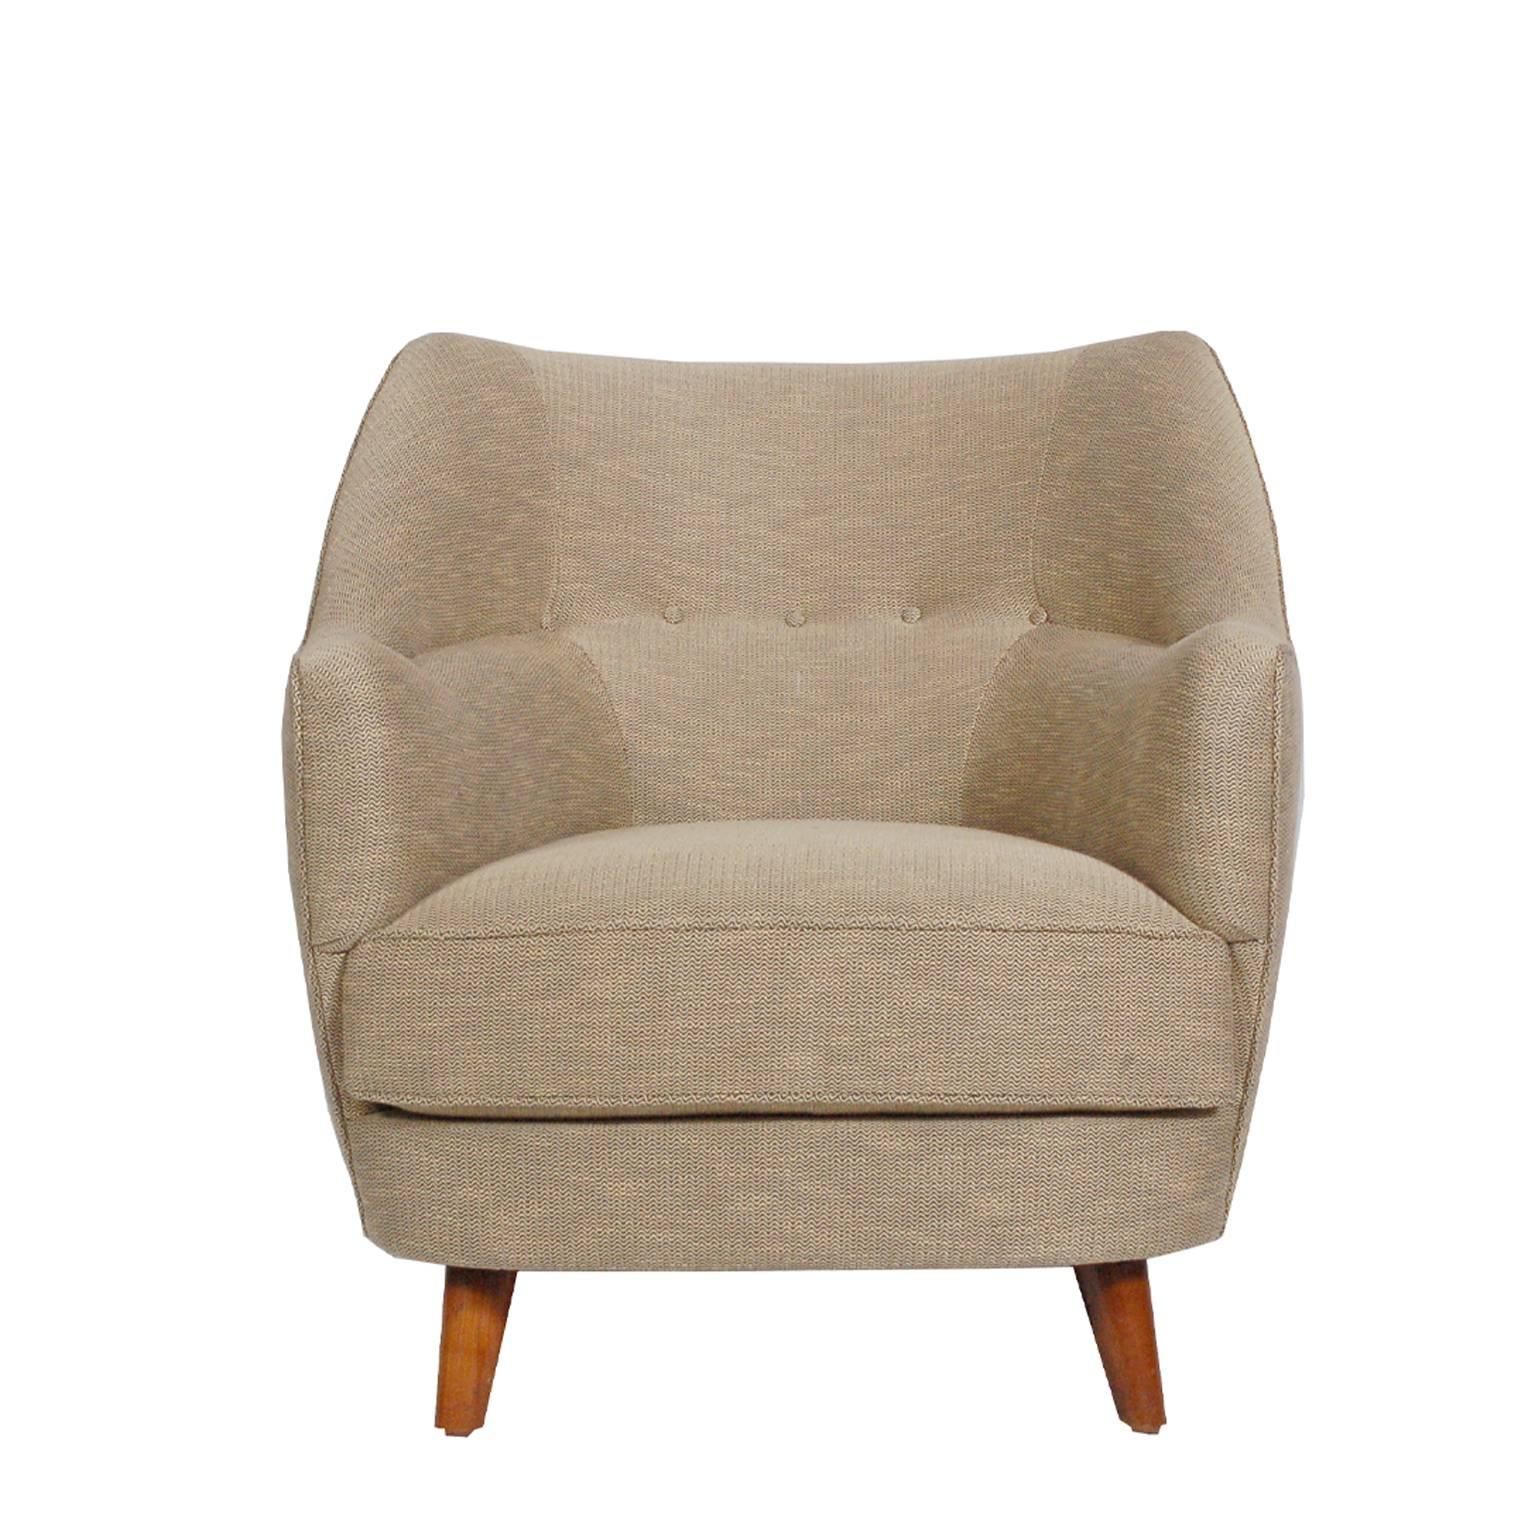 Rounded lounge chair with curving arms, inset seat and stained birch legs. Buttoned back and arms. Newly upholstered in coraggio fabric. Retains label from latex company, dated 1955.